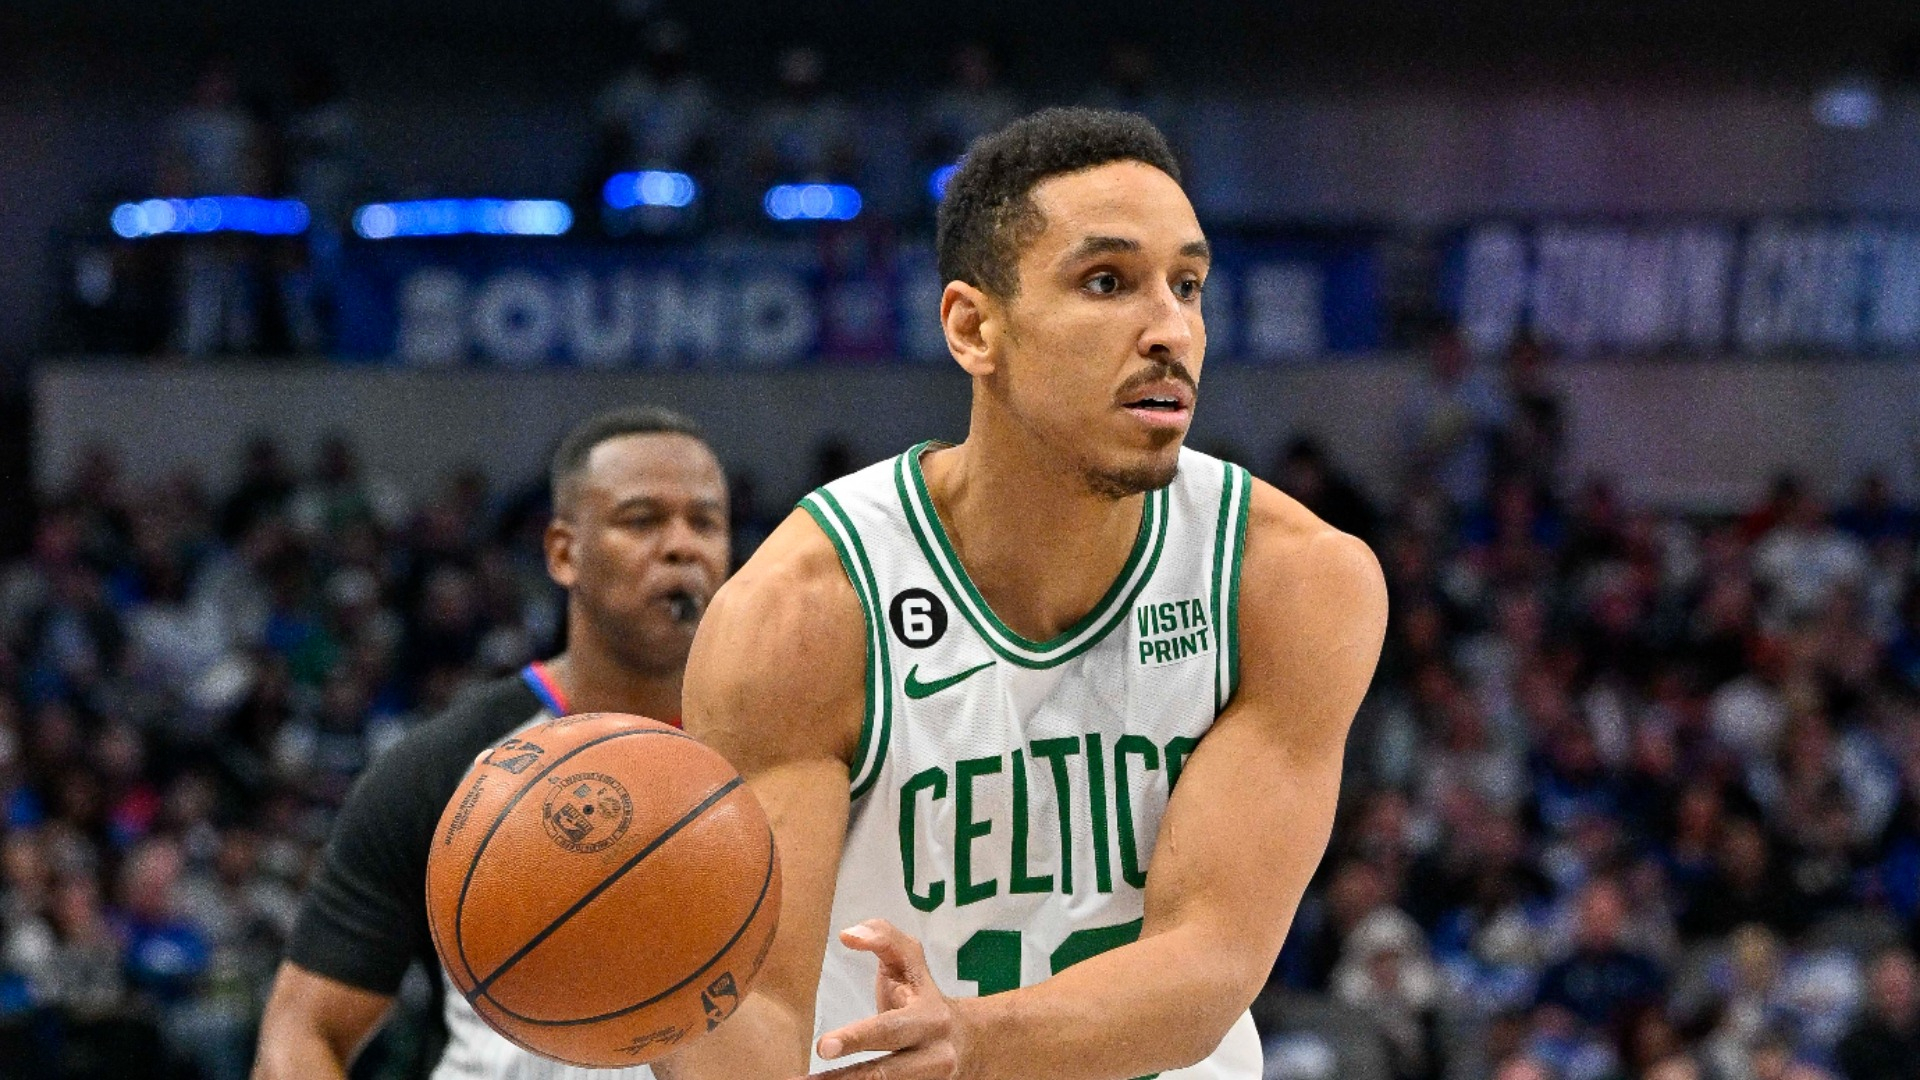 Celtics, Lakers Debut New Uniforms Tonight in NBA Openers